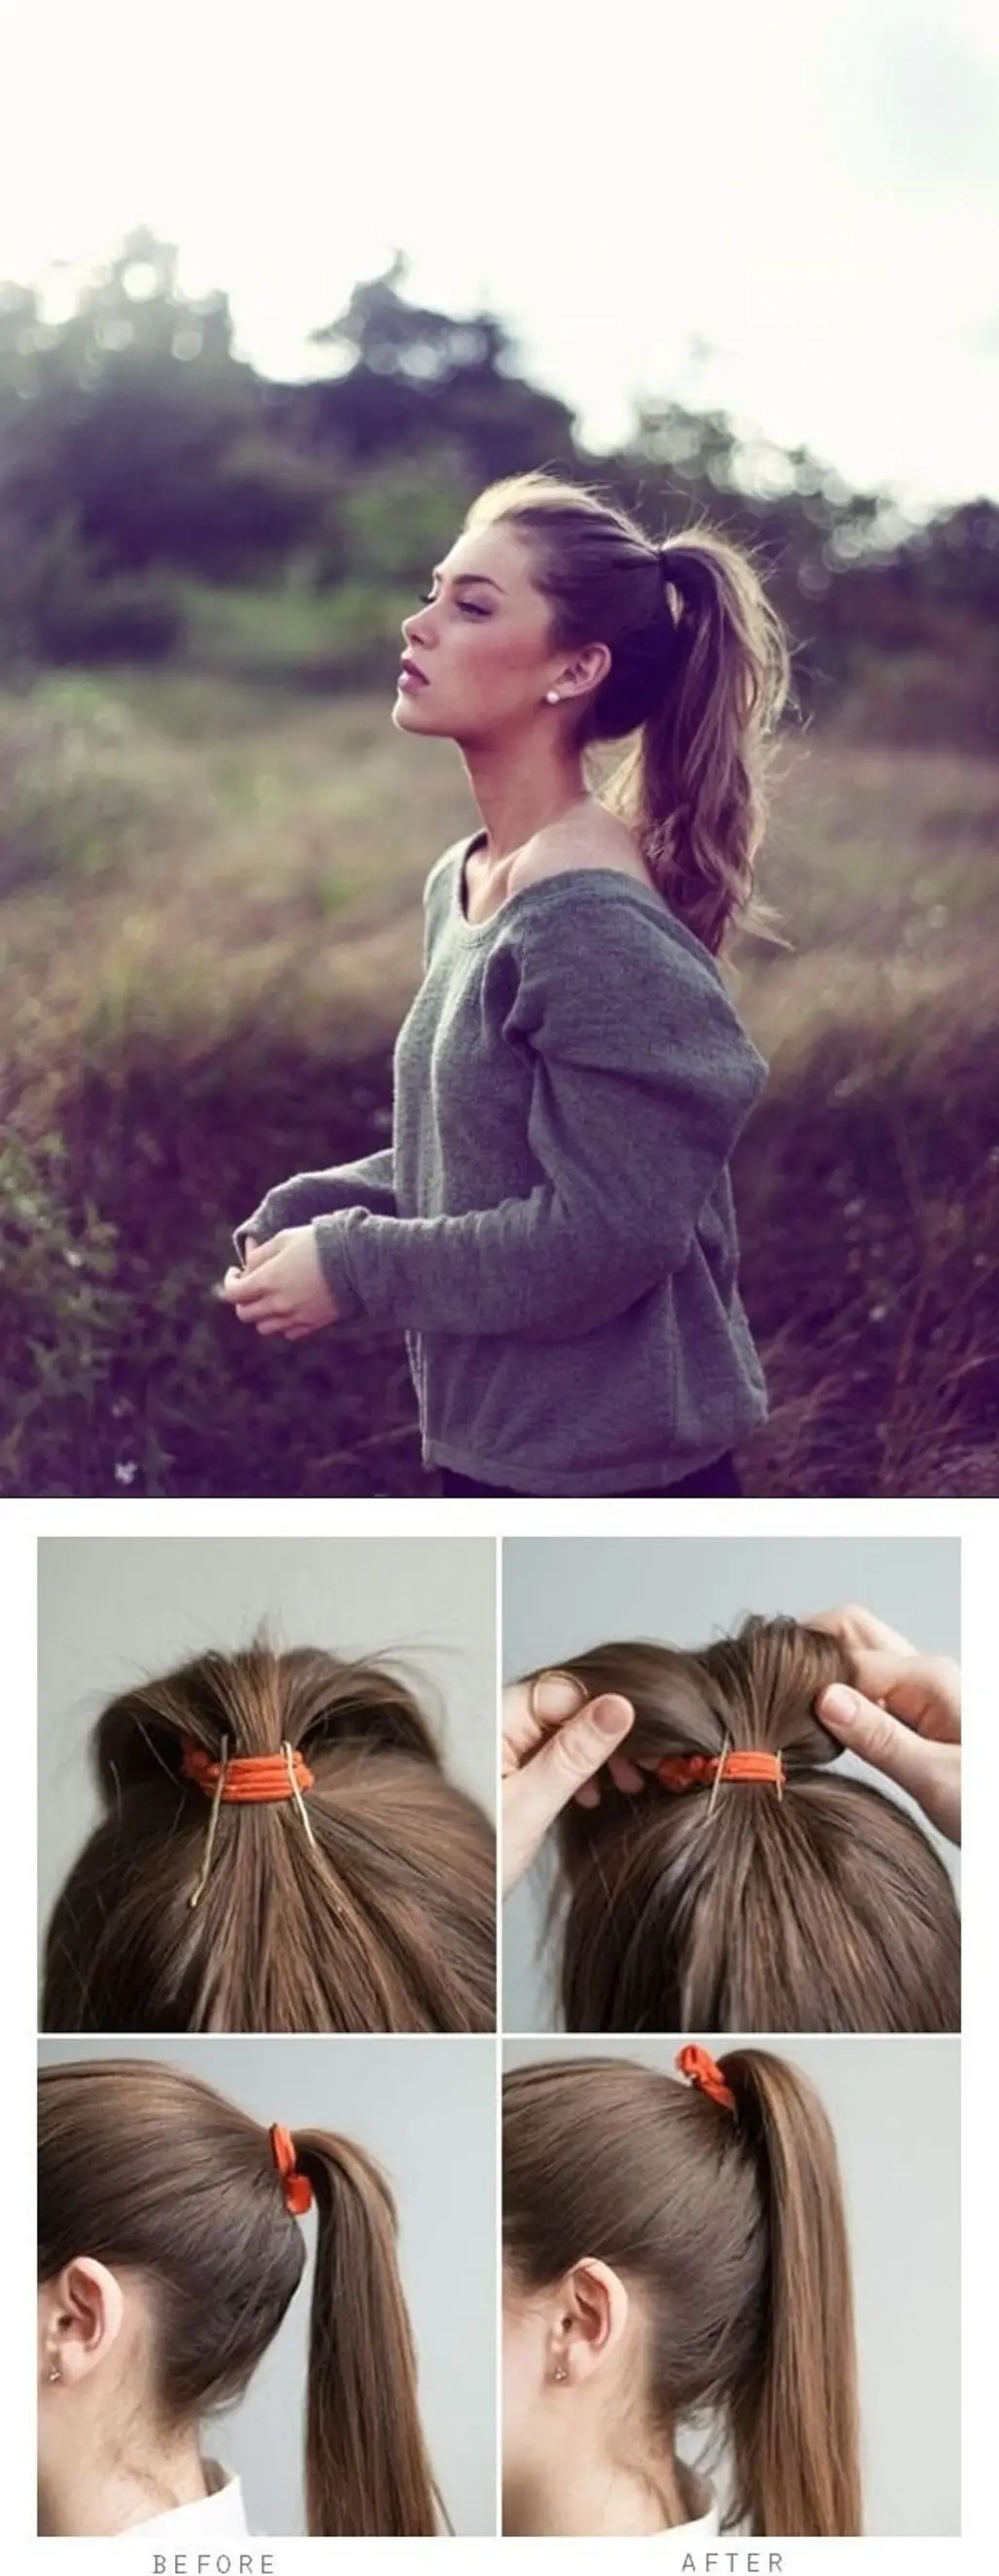 hair,photograph,photography,hairstyle,beauty,